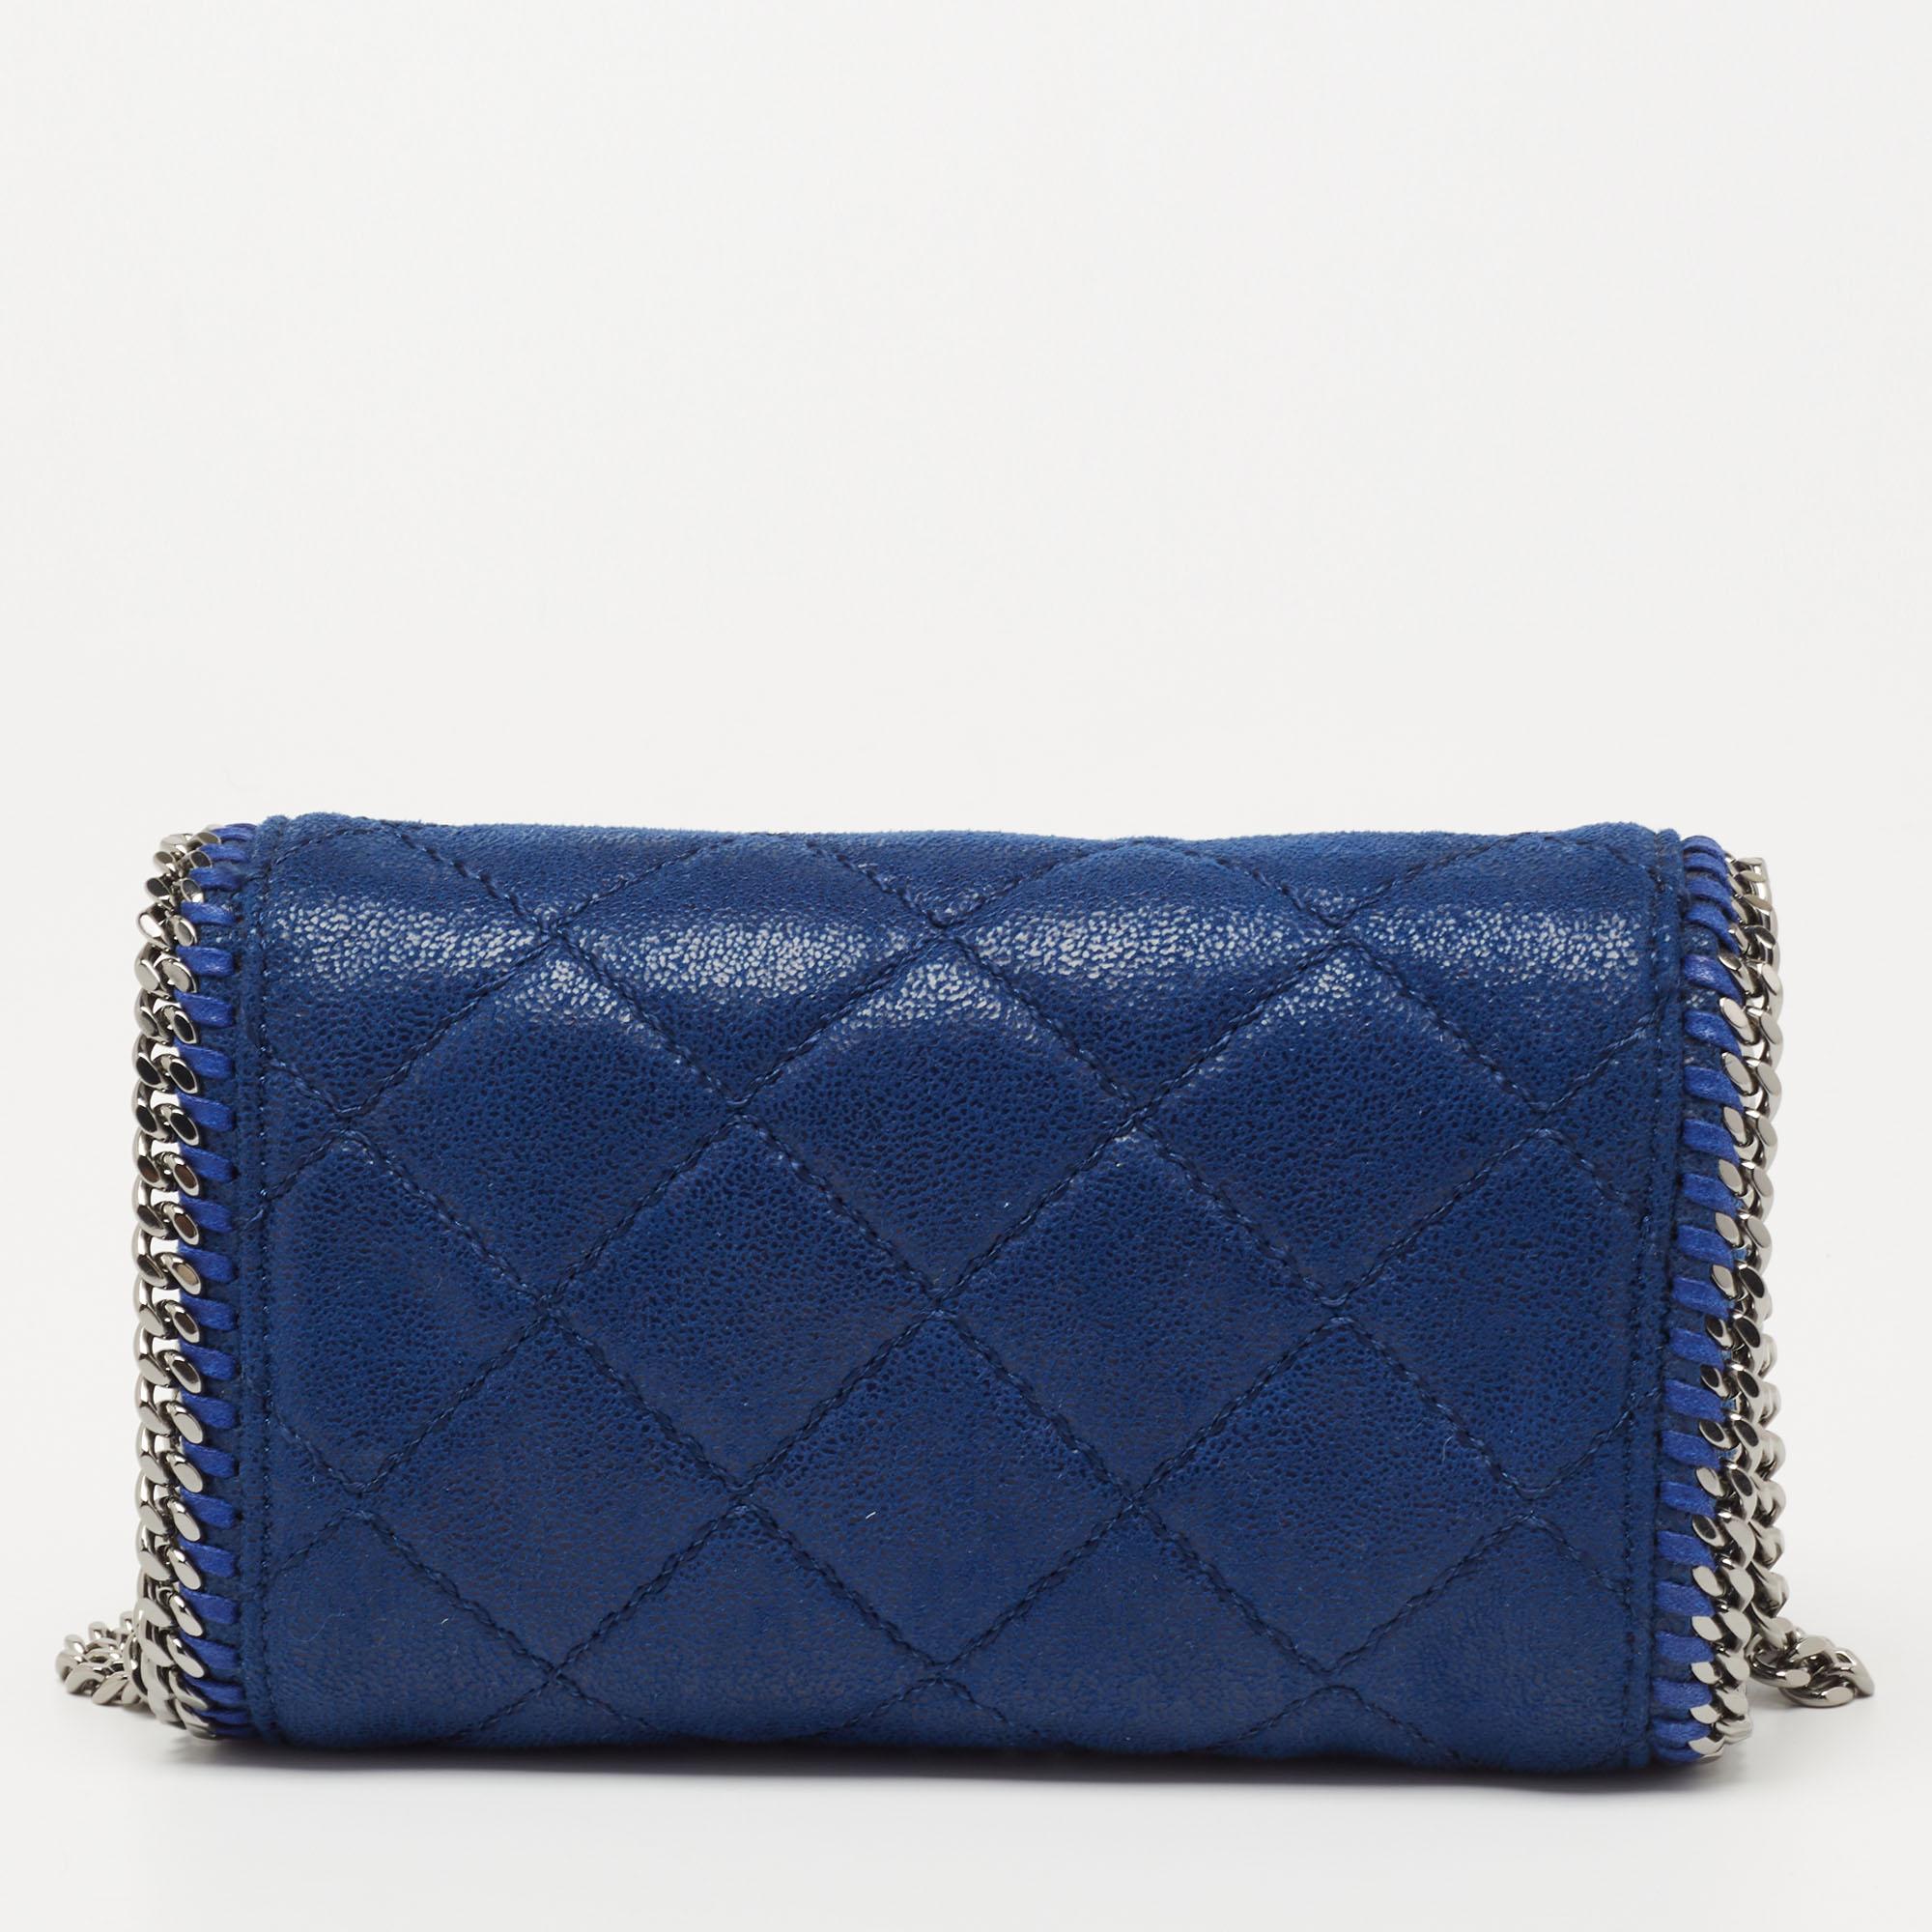 Elegance meets luxury in this Falabella shoulder bag from House of Stella McCartney. It is created using blue quilted faux suede on the exterior. It has a roomy fabric-lined interior, gunmetal-tone hardware, and a 57 cm strap. This bag will elevate